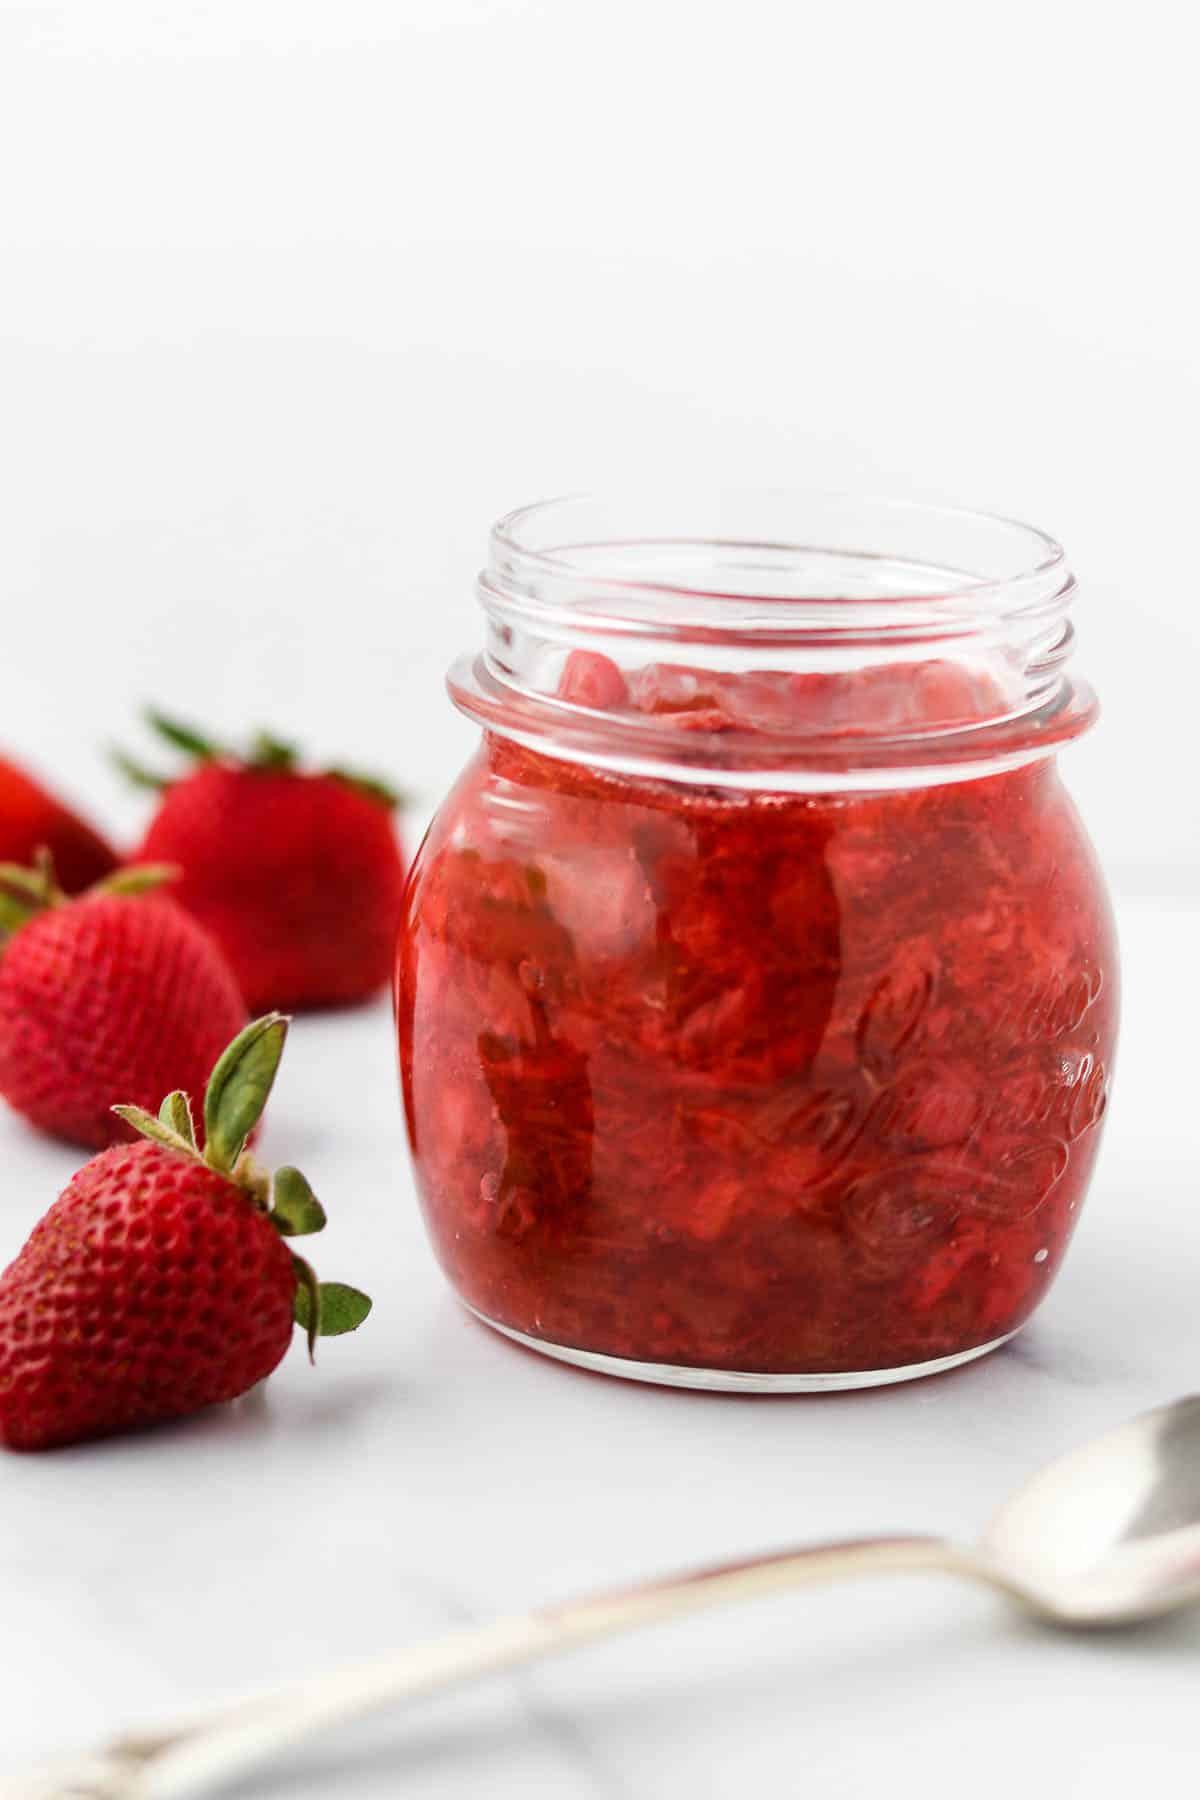 Strawberry Rhubarb Compote in a jar next to a spoon and strawberries.